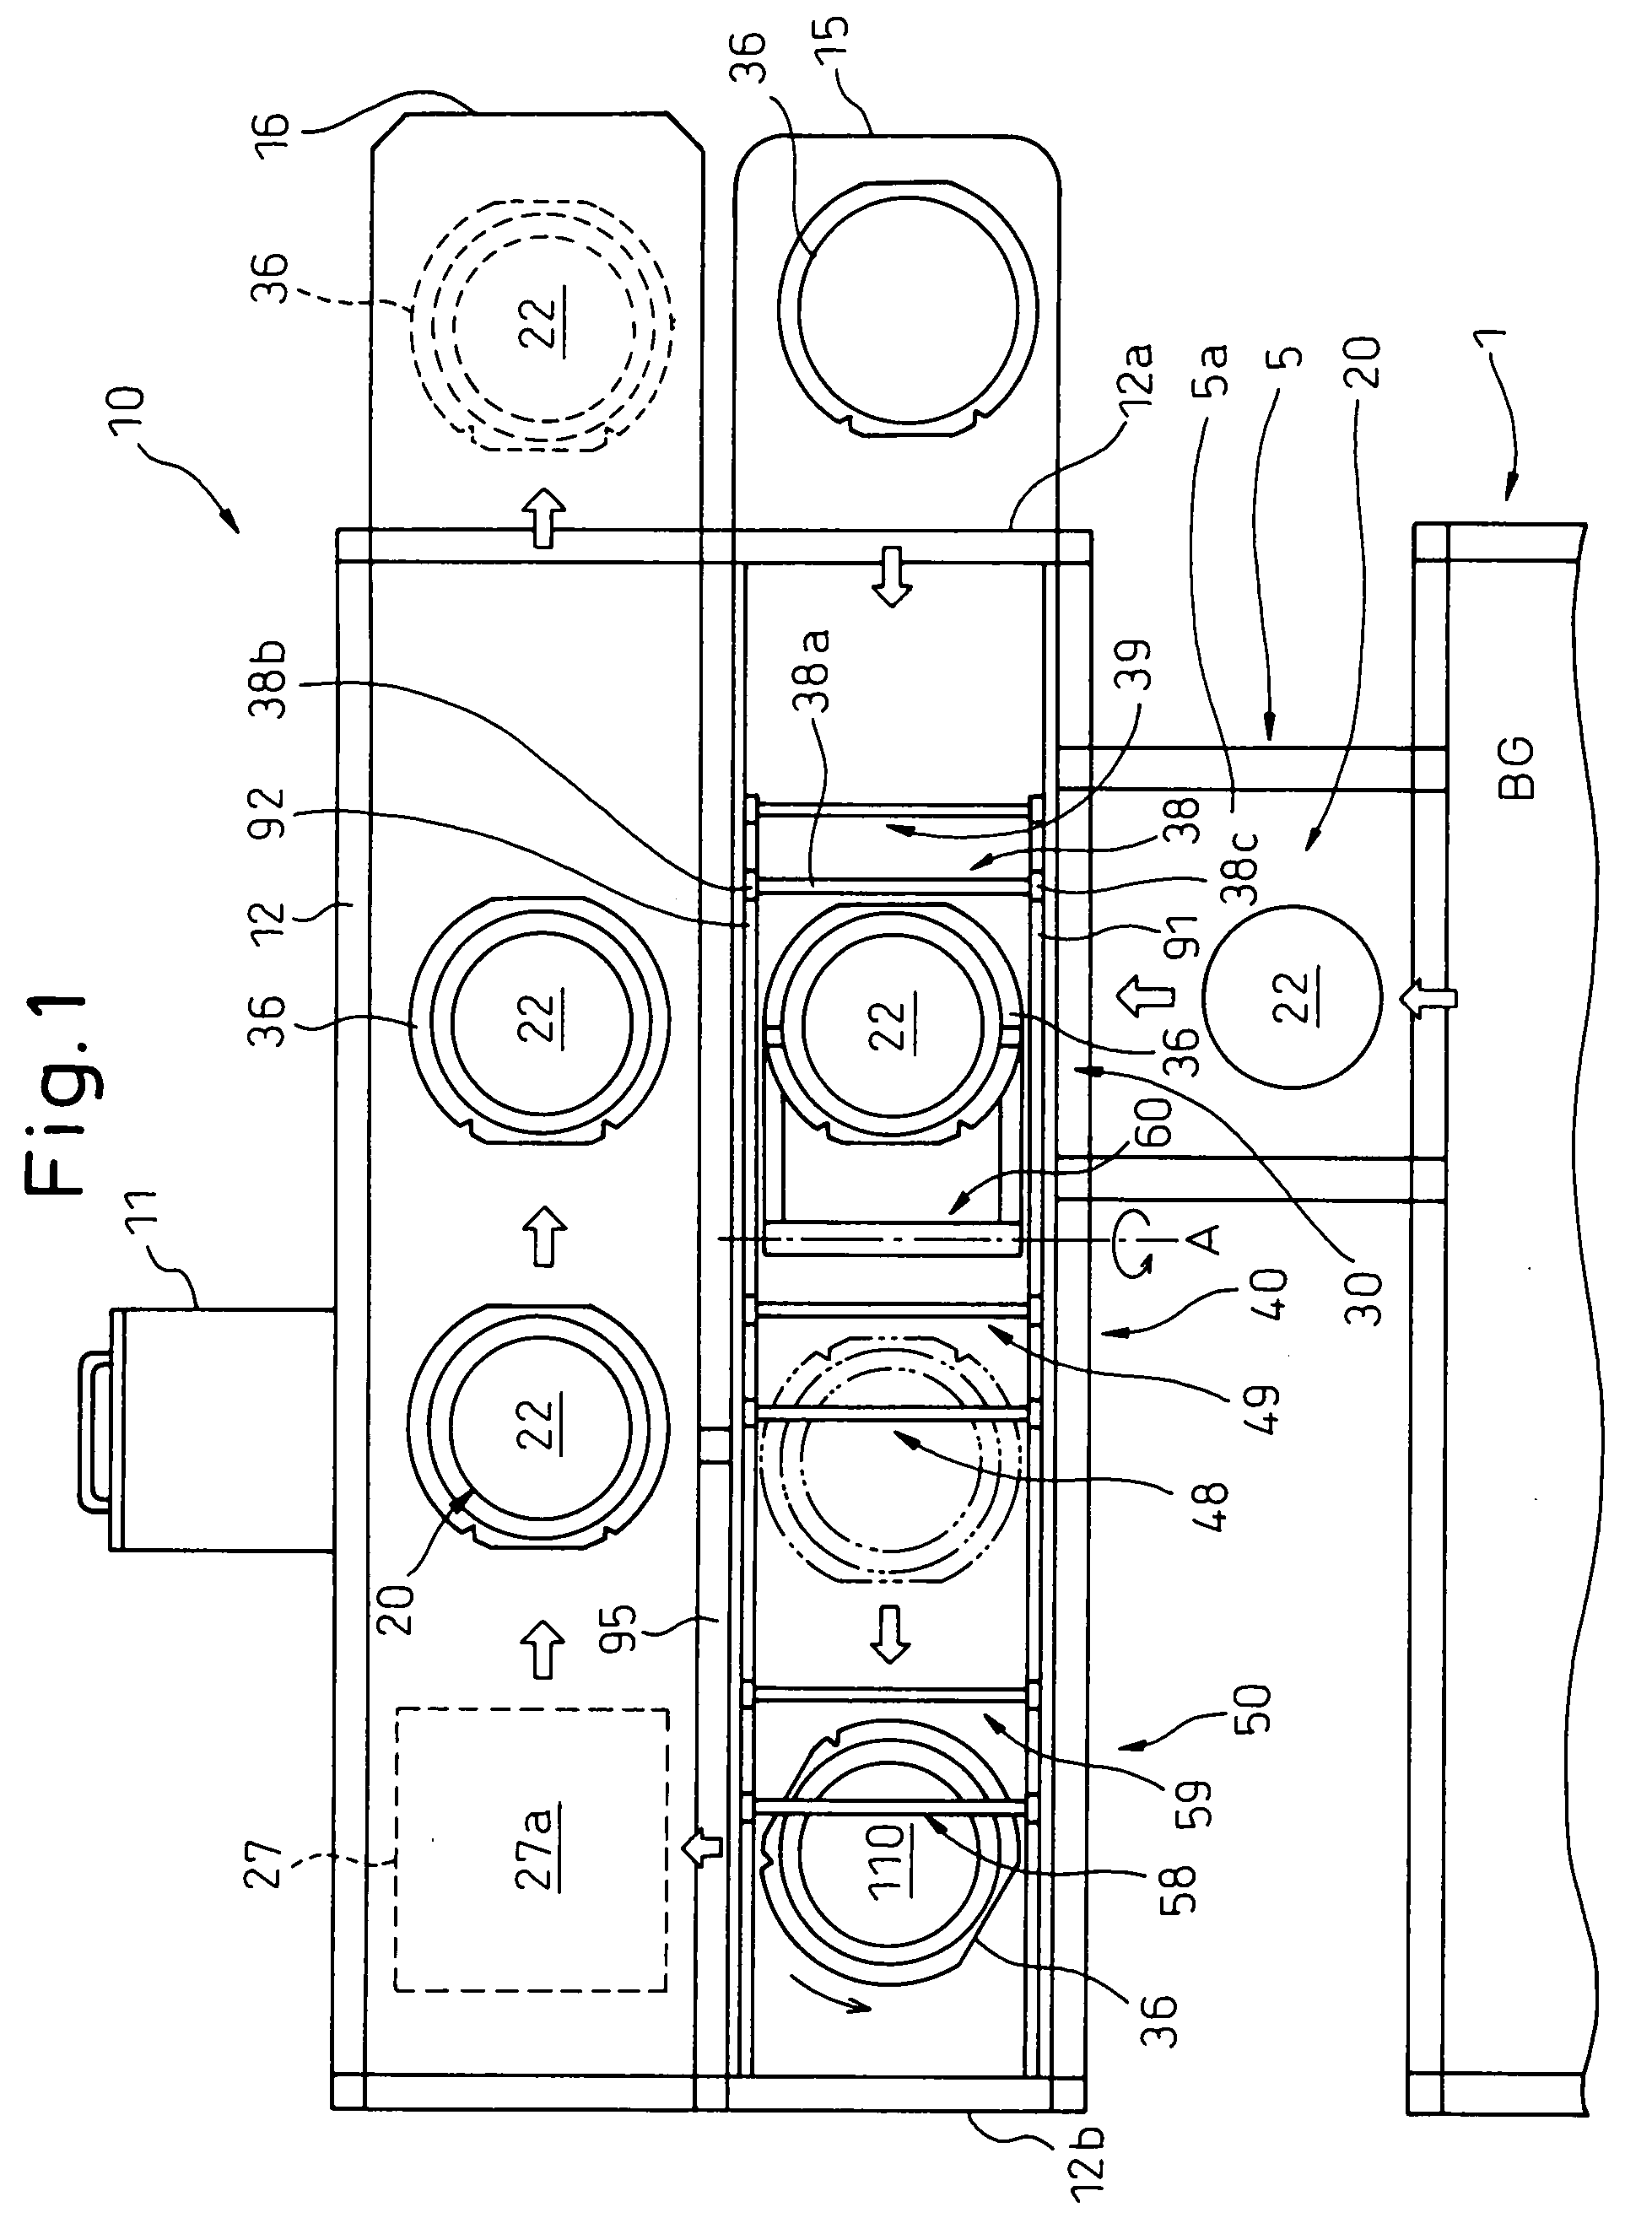 Wafer processing apparatus